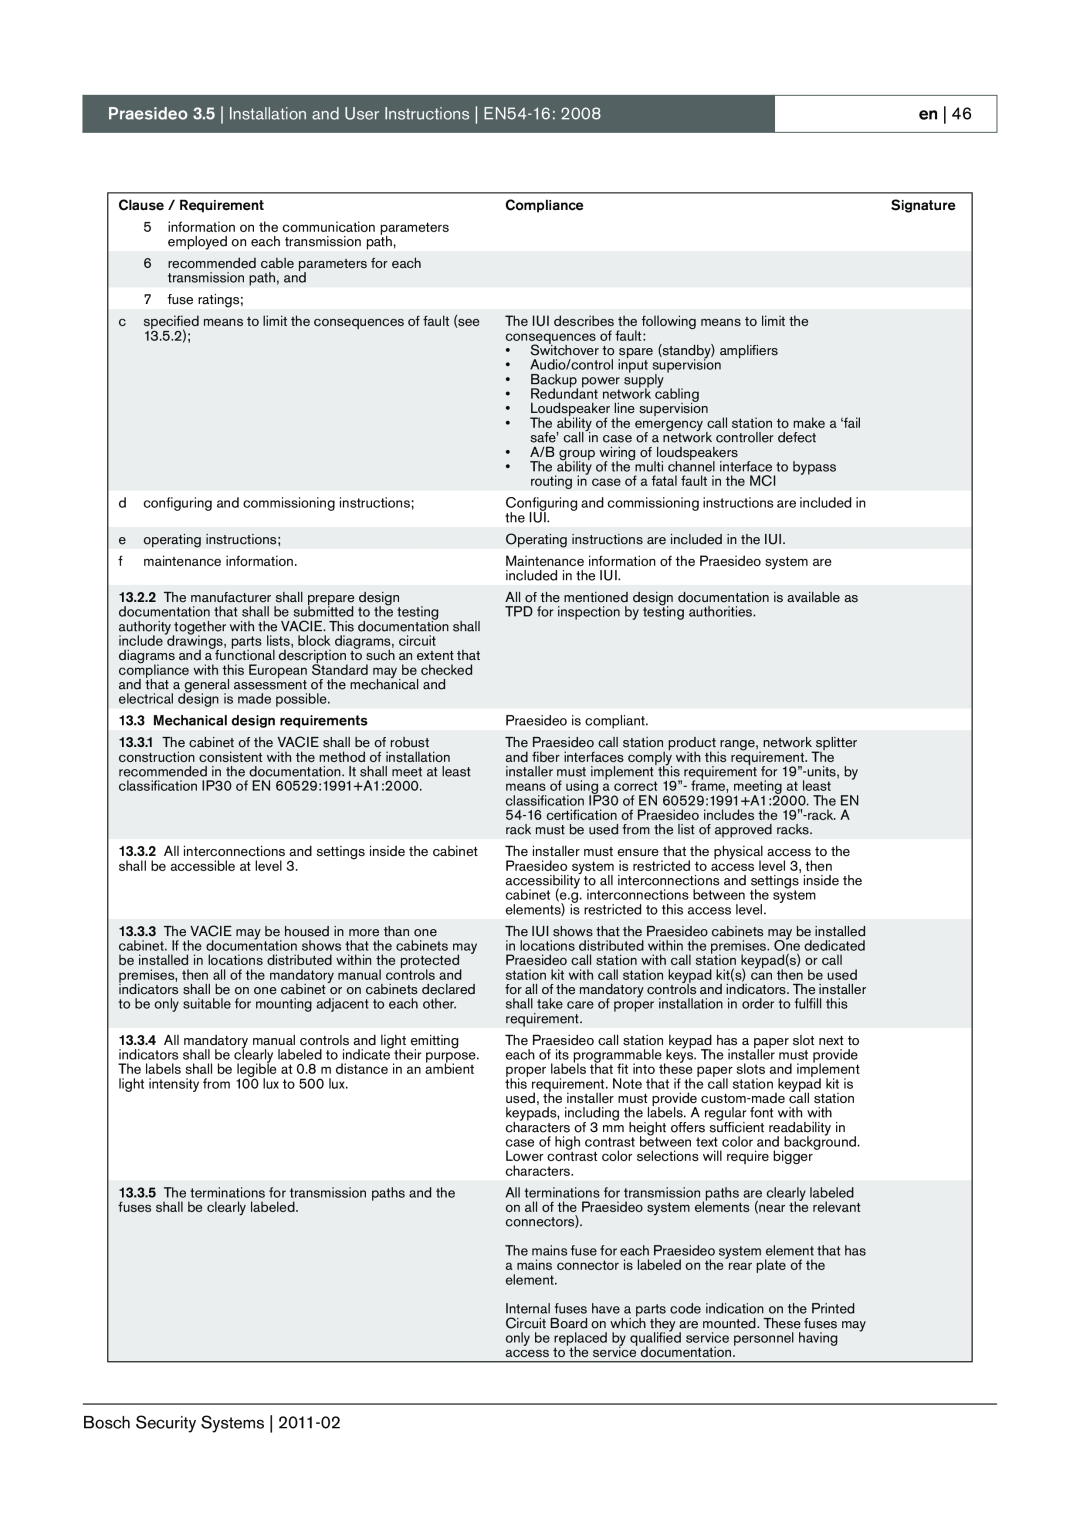 Bosch Appliances 3.5 manual Clause / Requirement 